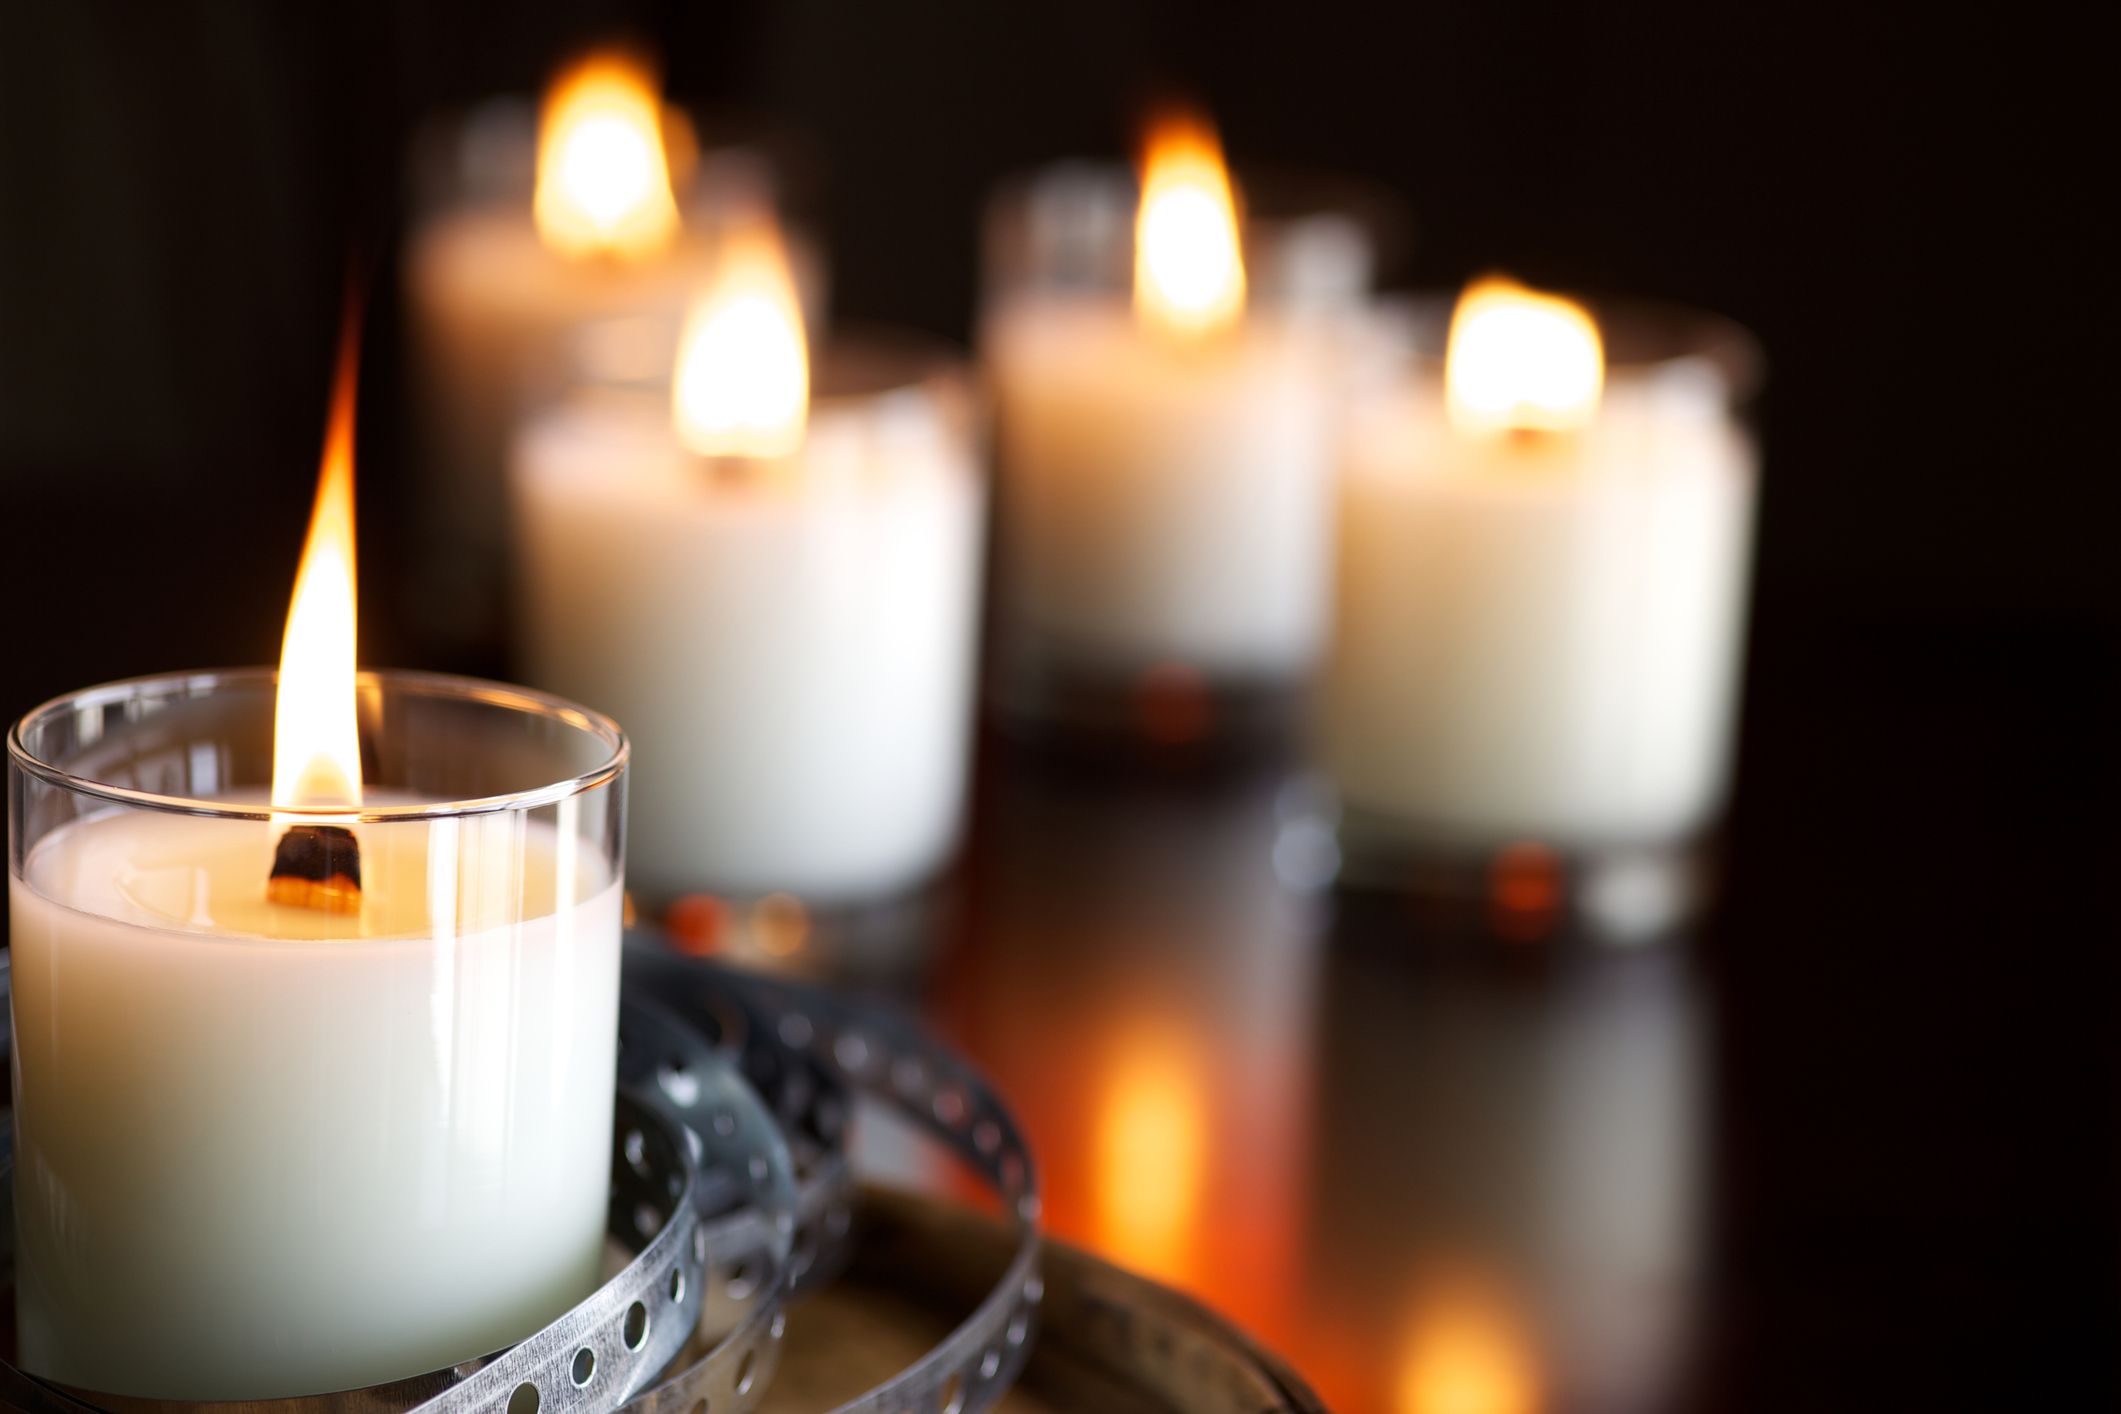 How To Make Paraffin Wax Candles